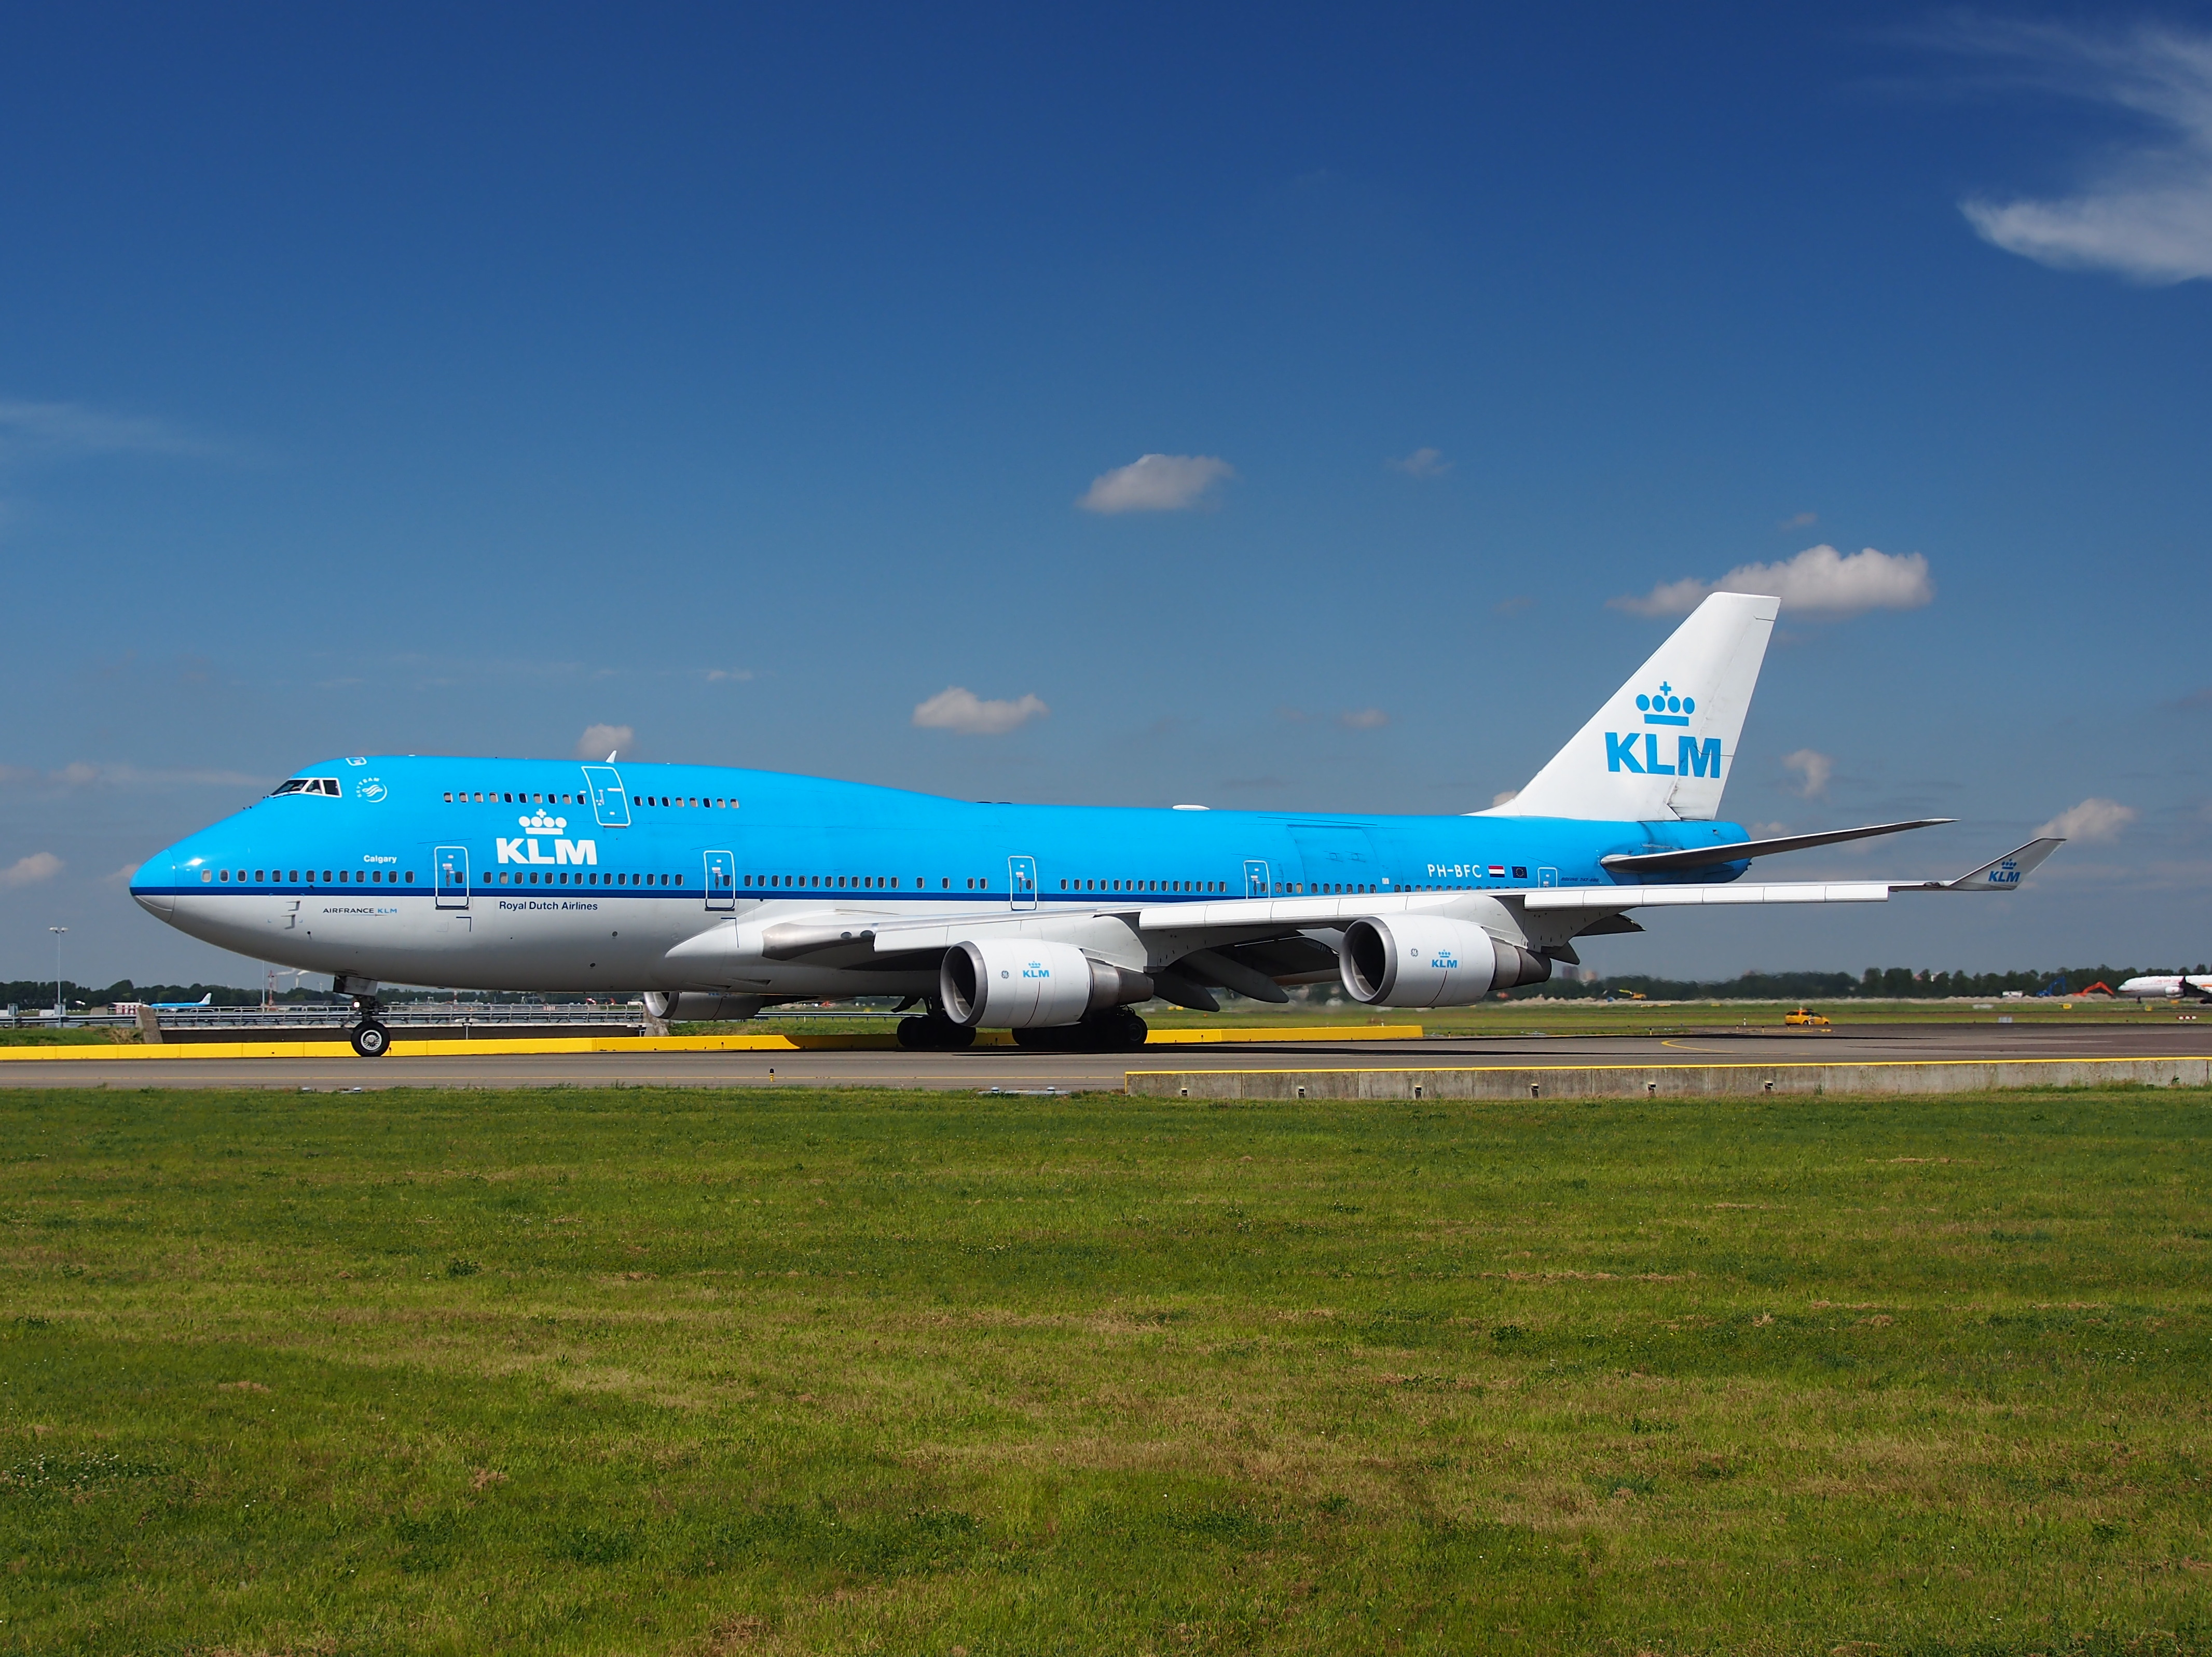 PH-BFC_KLM_Royal_Dutch_Airlines_Boeing_747-406%28M%29_taxiing_at_Schiphol_%28AMS_-_EHAM%29%2C_The_Netherlands%2C_18may2014%2C_pic-6.JPG